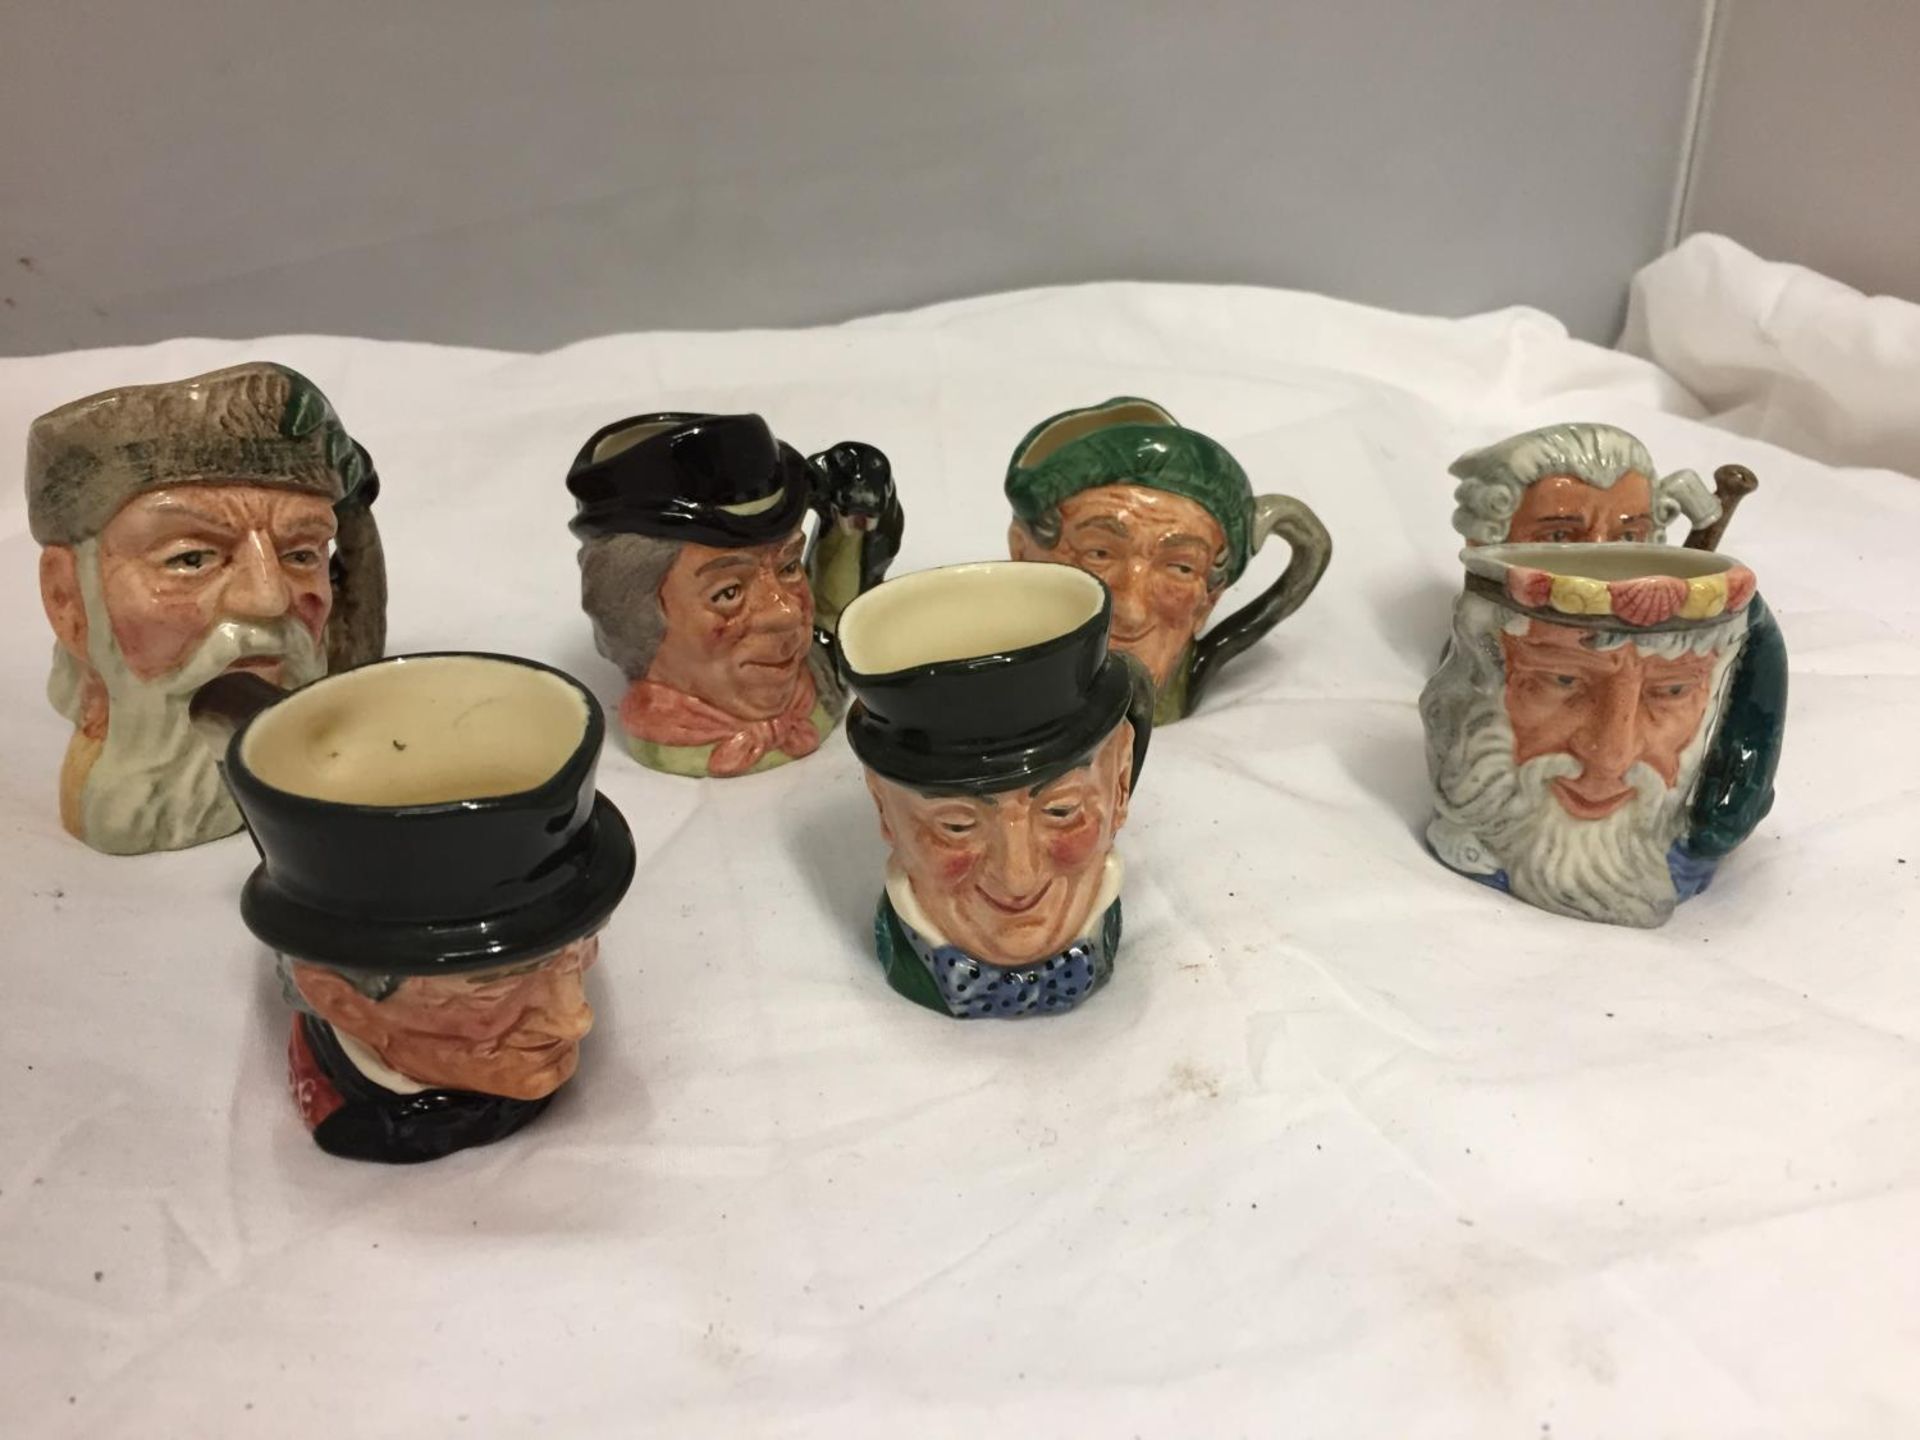 SEVEN SMALL ROYAL DOULTON TOBY JUGS TO INCLUDE 'NEPTUNE' AND 'ROBINSON CRUSOE' - Image 2 of 3